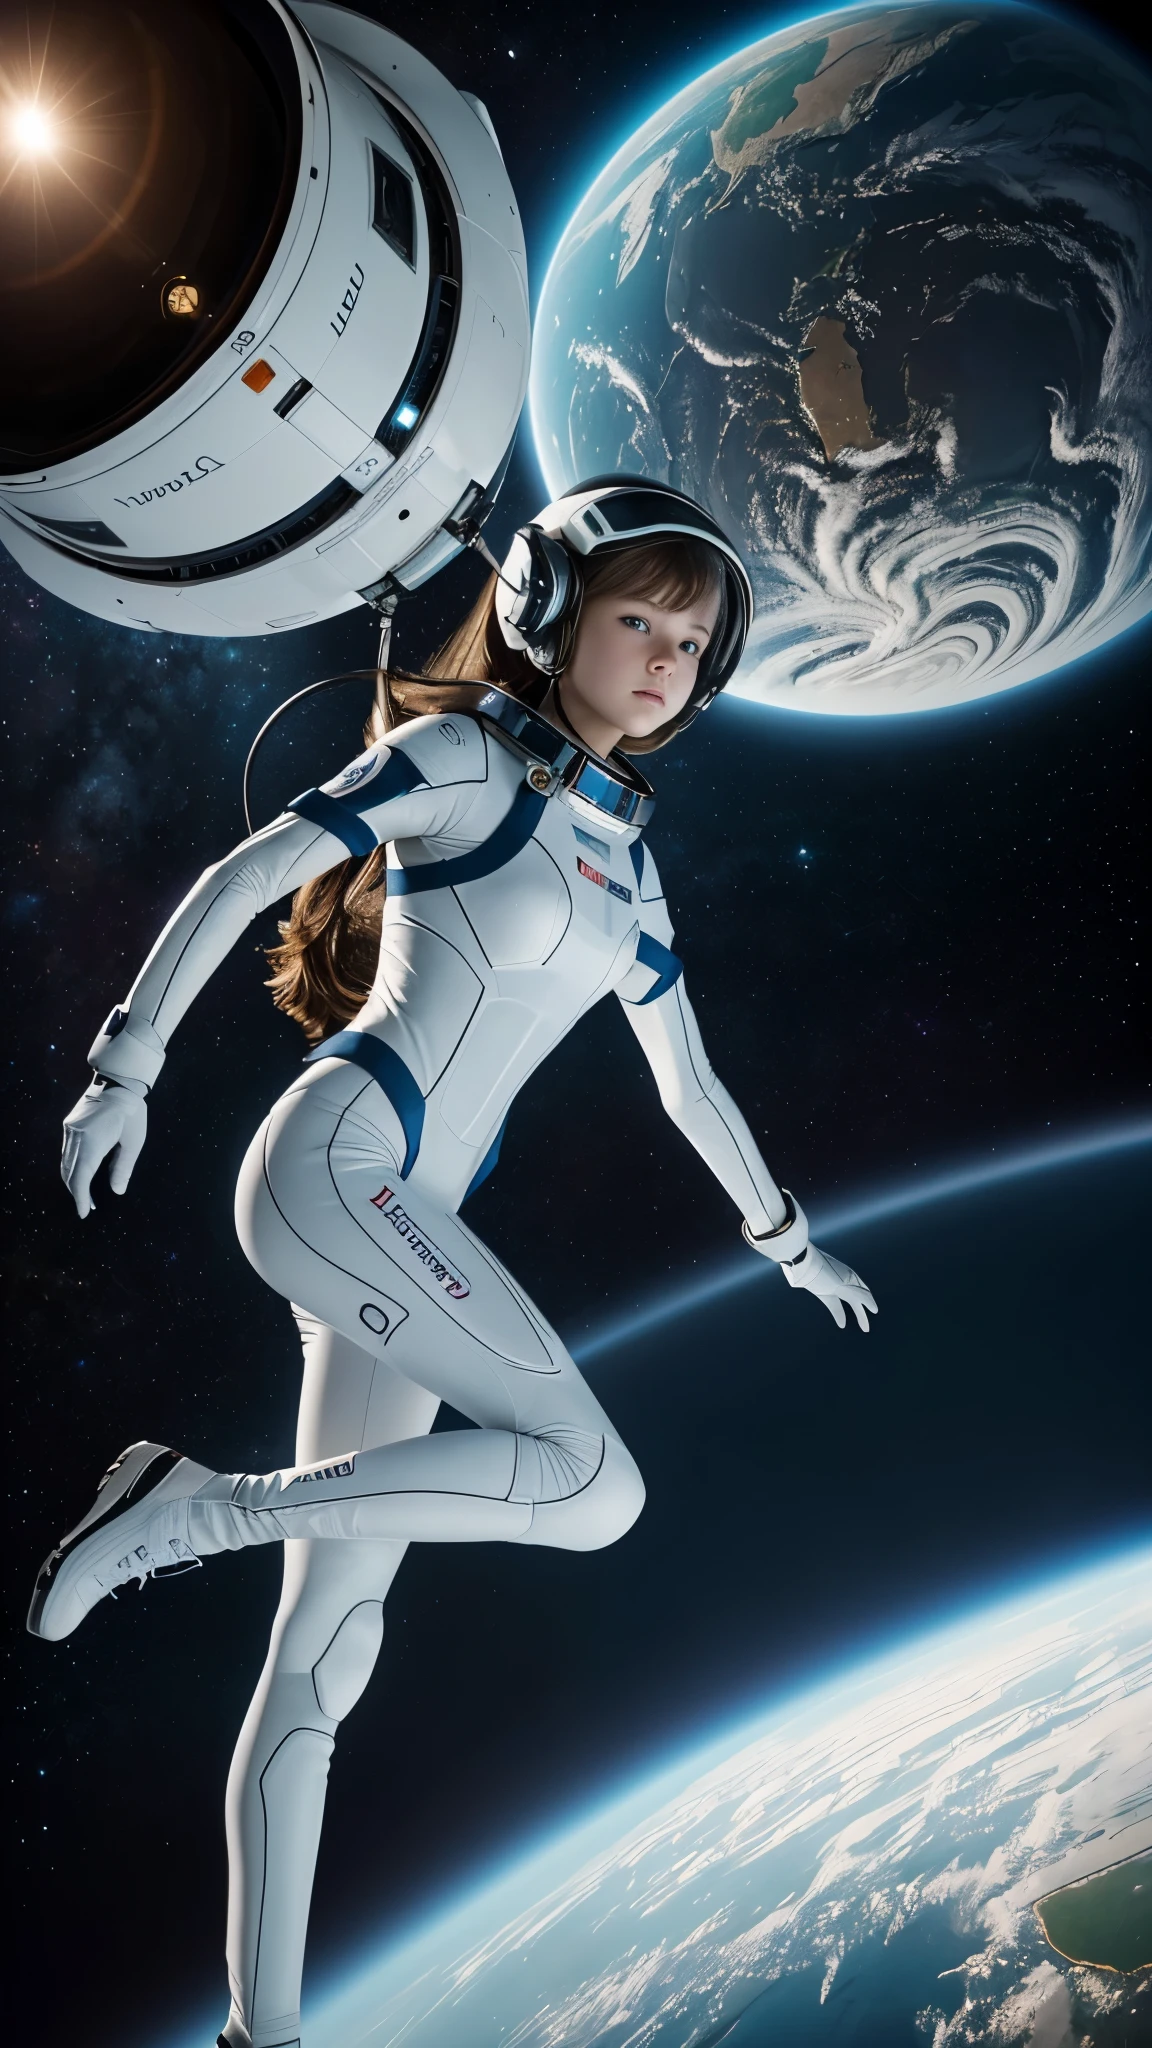 (photograph of a detailed beautiful 18-year old woman with ((facial and body characteristics that is similar to Kristina Pimenova))), finely detailed, ultra-realistic features of her pale skin and (slender and athletic body), and (symmetrical, realistic and beautiful face), Propel viewers into outer space with an astronaut's zero gravity exploration. The model, clad in a futuristic space suit, gracefully floats in a simulated zero-gravity environment. The camera, a DSLR with a fisheye lens, captures the otherworldly scene from a frontal angle, accentuating the curvature of the Earth in the background. The model's hair is styled in a sleek and functional astronaut helmet. Props include scientific instruments. The photographic style is high-tech and immersive, with a cosmic color palette.